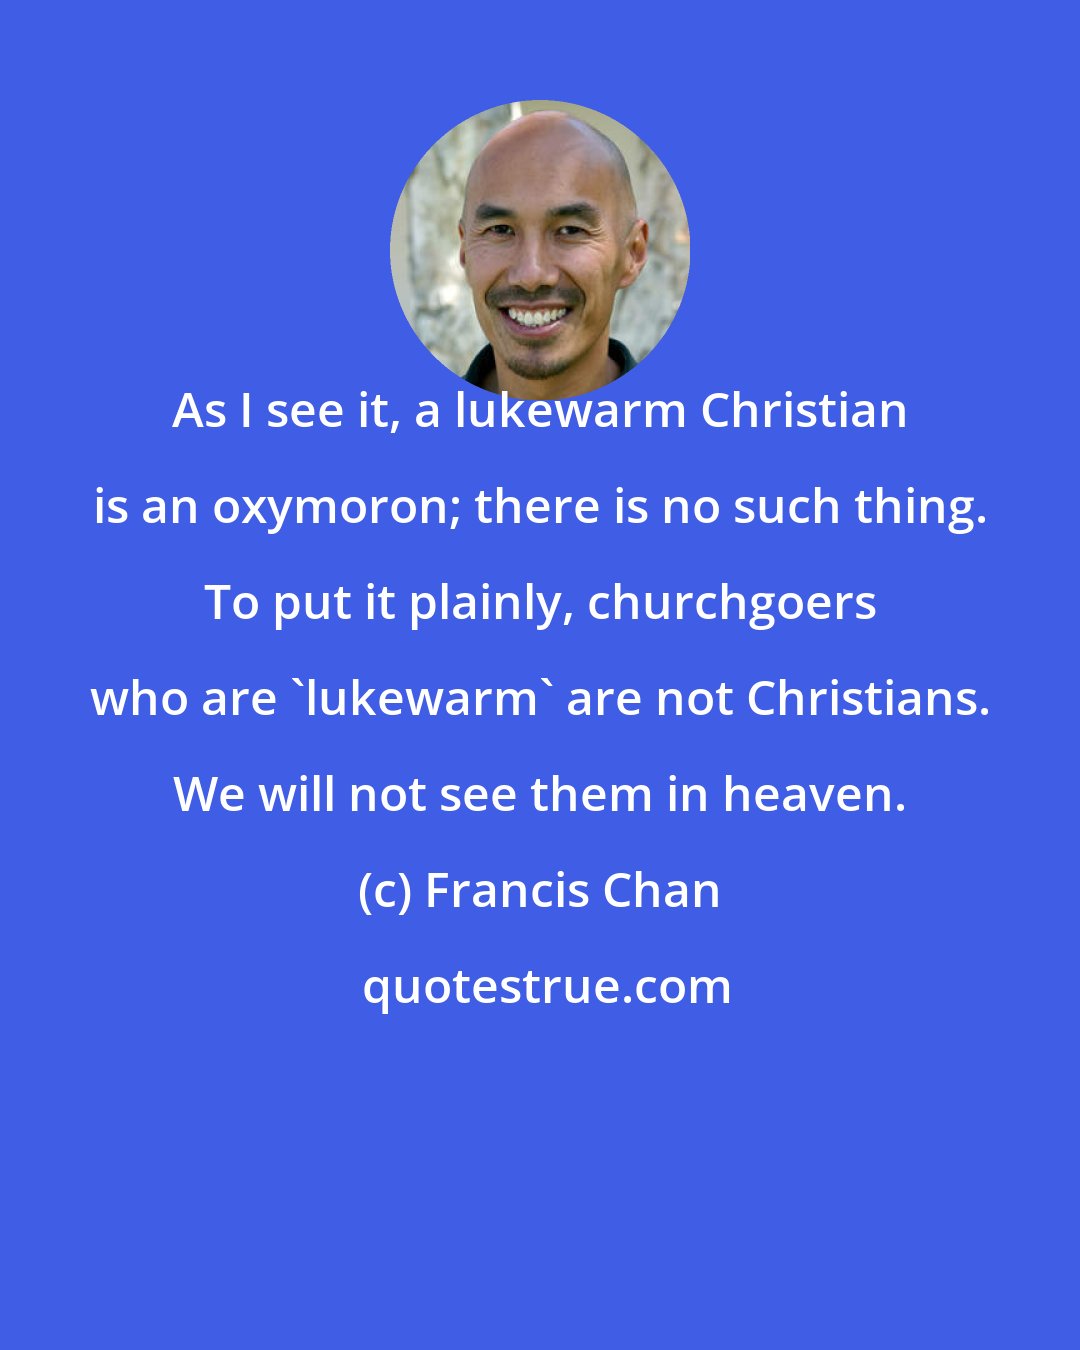 Francis Chan: As I see it, a lukewarm Christian is an oxymoron; there is no such thing. To put it plainly, churchgoers who are 'lukewarm' are not Christians. We will not see them in heaven.